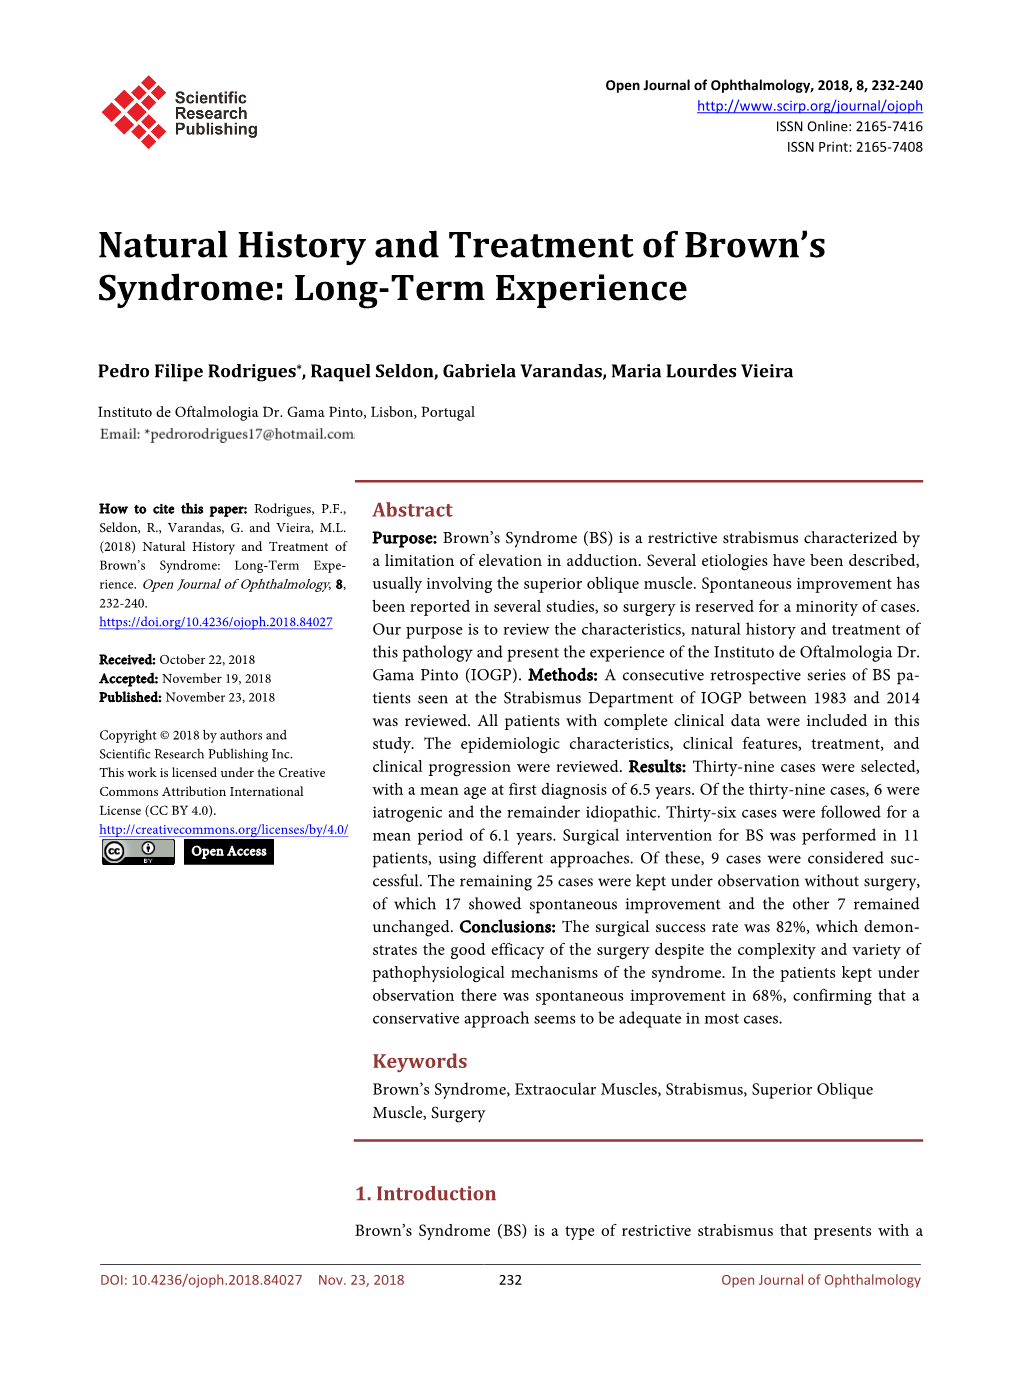 Natural History and Treatment of Brown's Syndrome